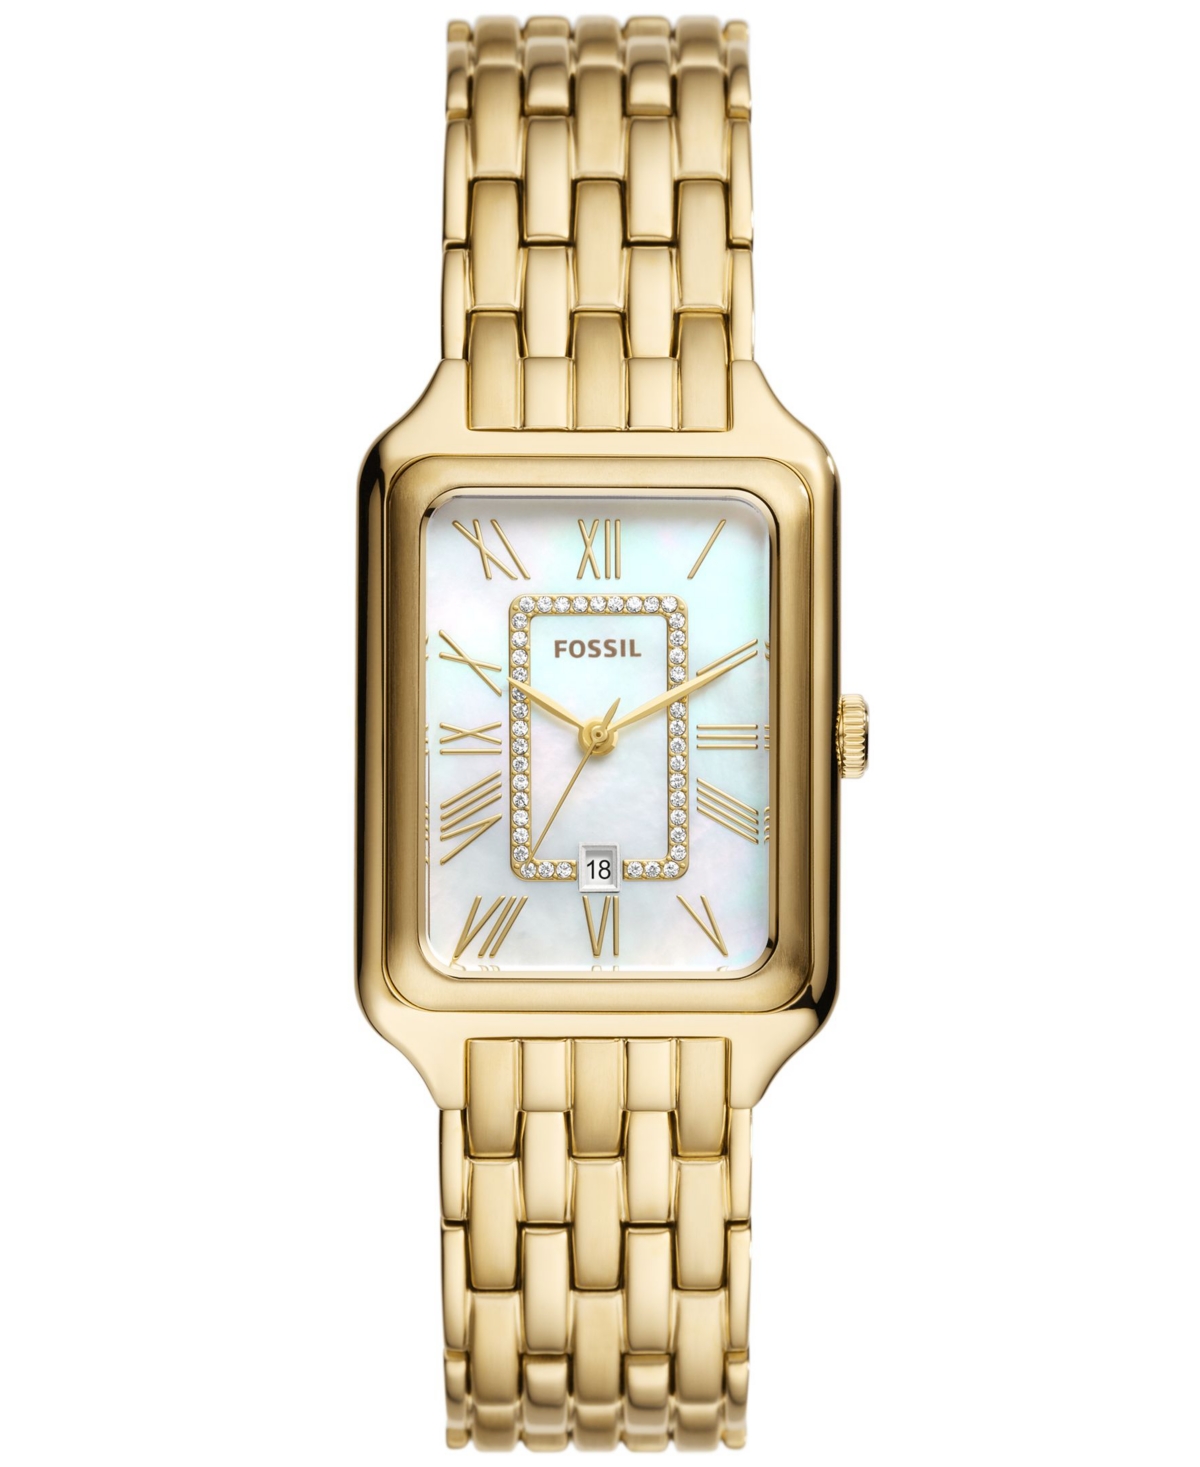 Fossil Women's Raquel Three-hand Date Gold-tone Stainless Steel Watch, 26mm